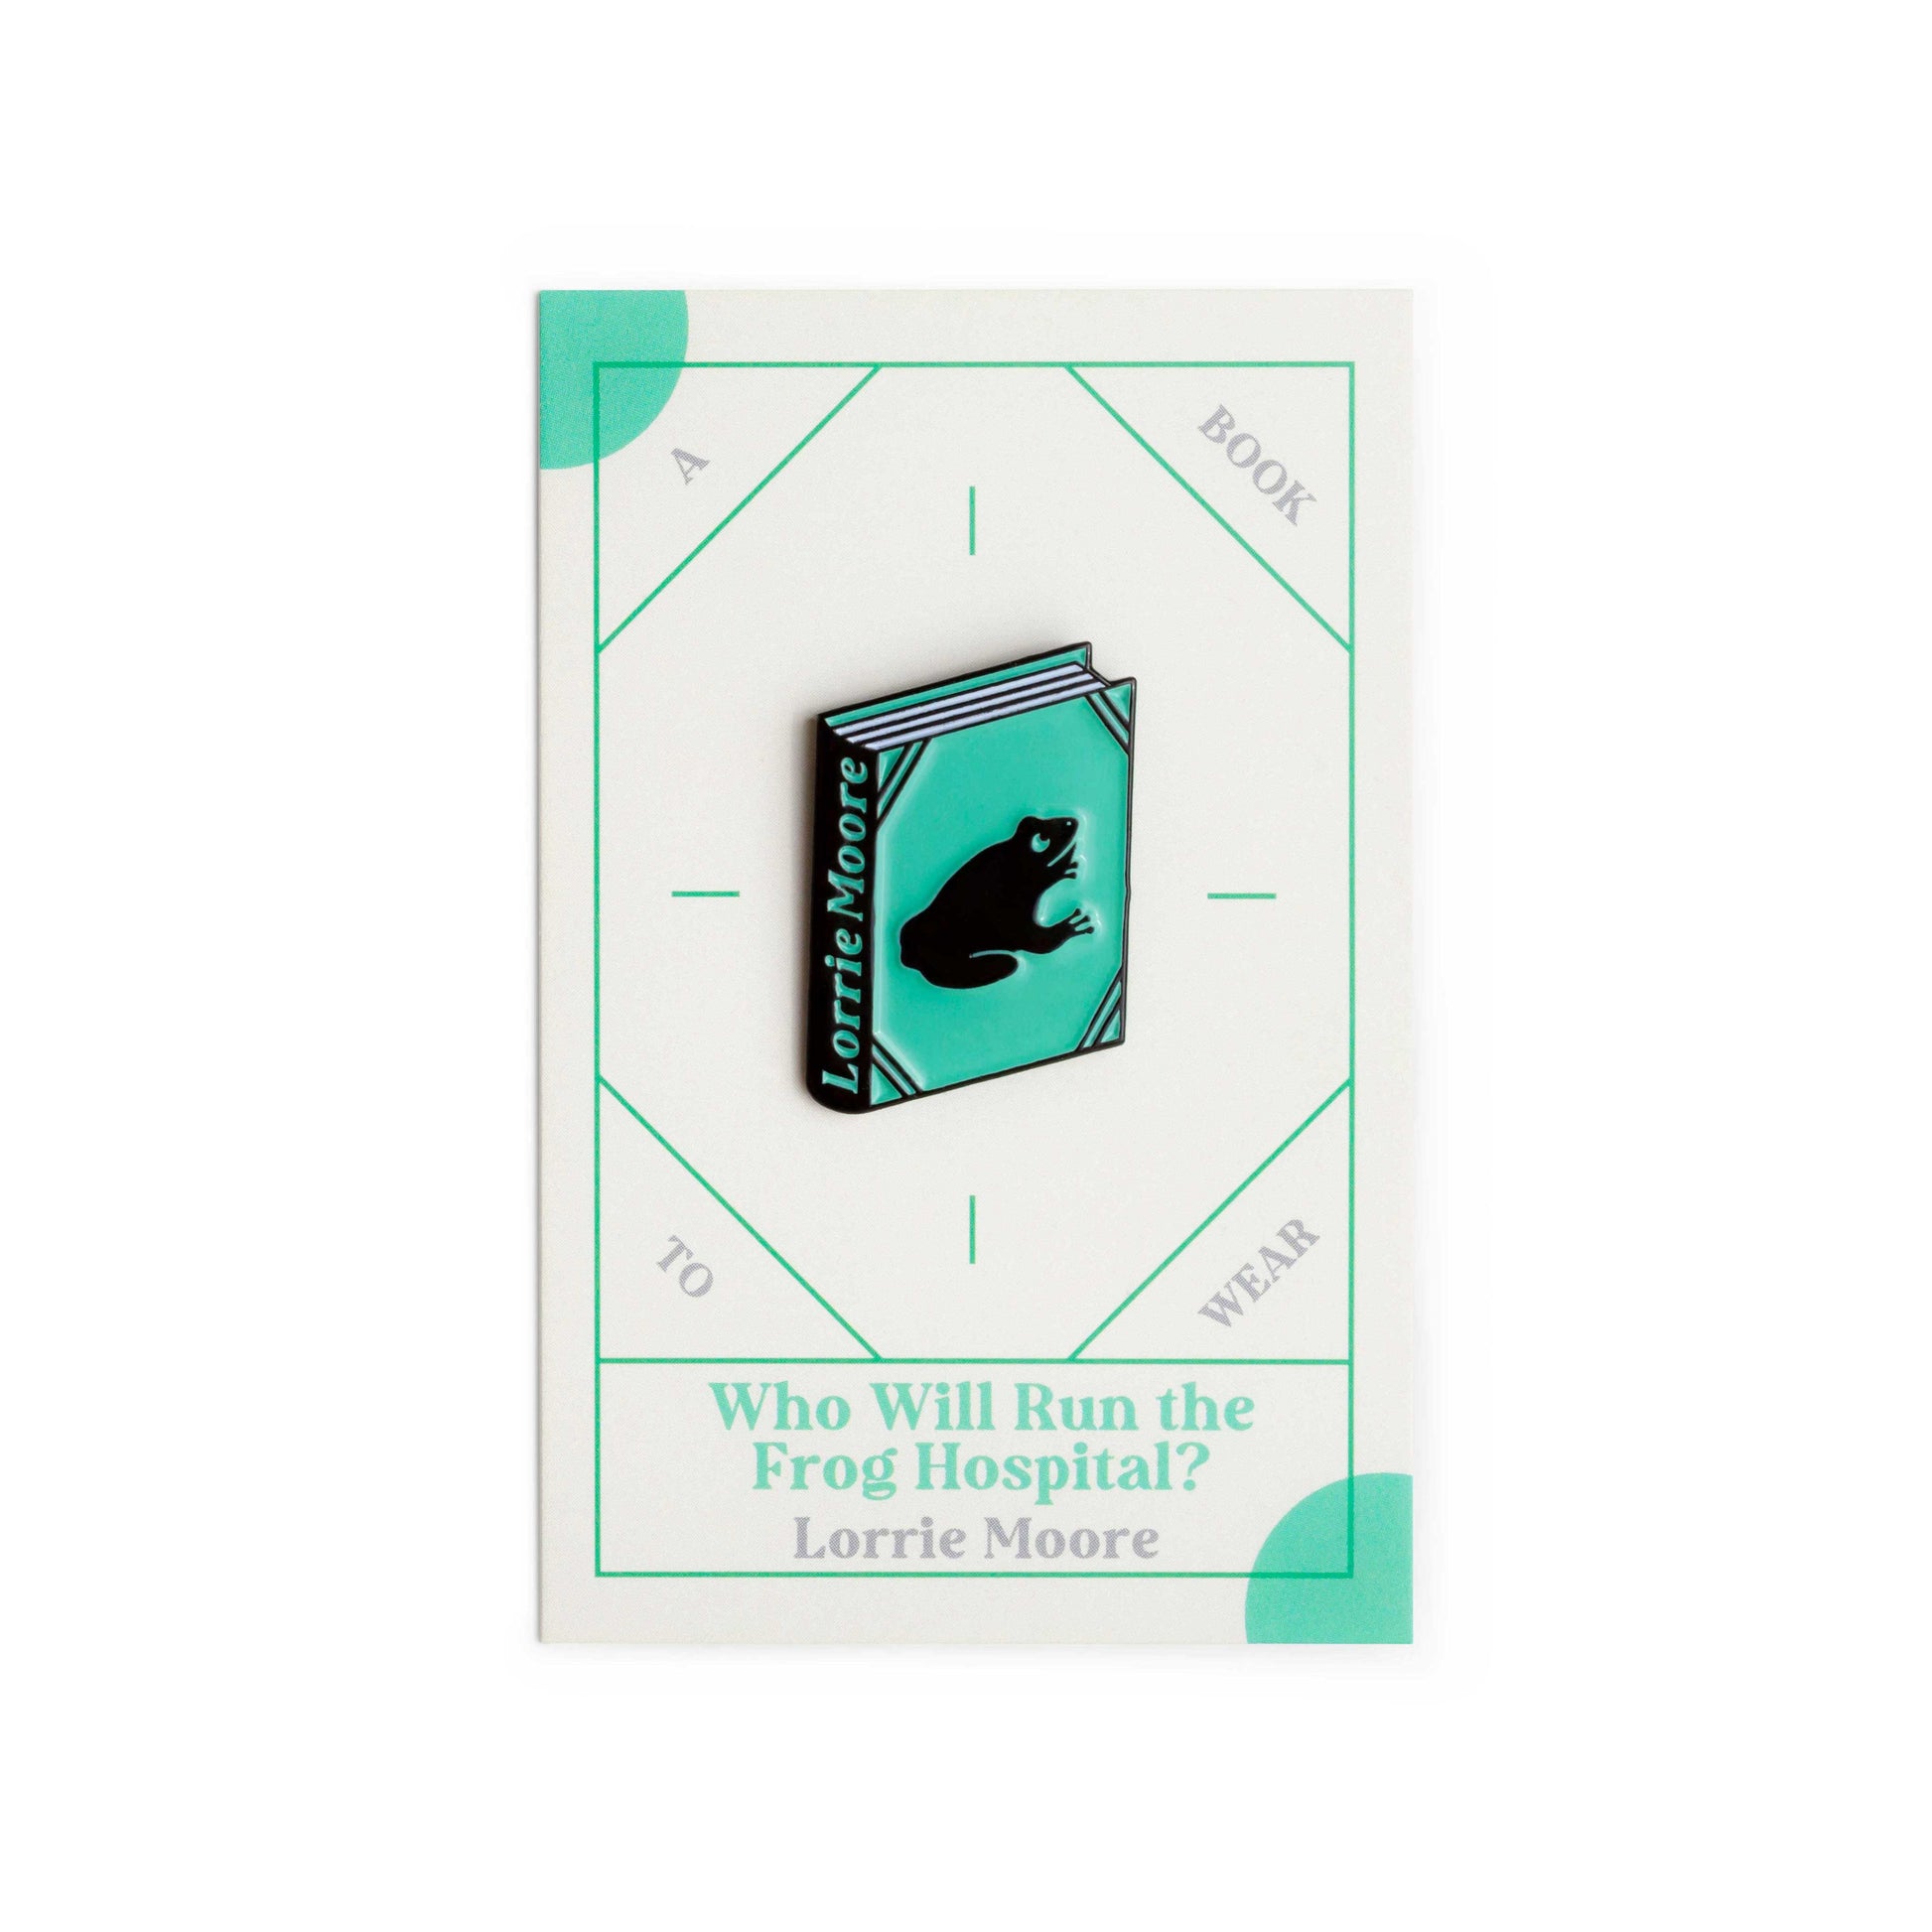 Who Will Run the Frog Hospital? Book by Lorrie Moore Enamel Pin by Judy Kaufmann with packaging